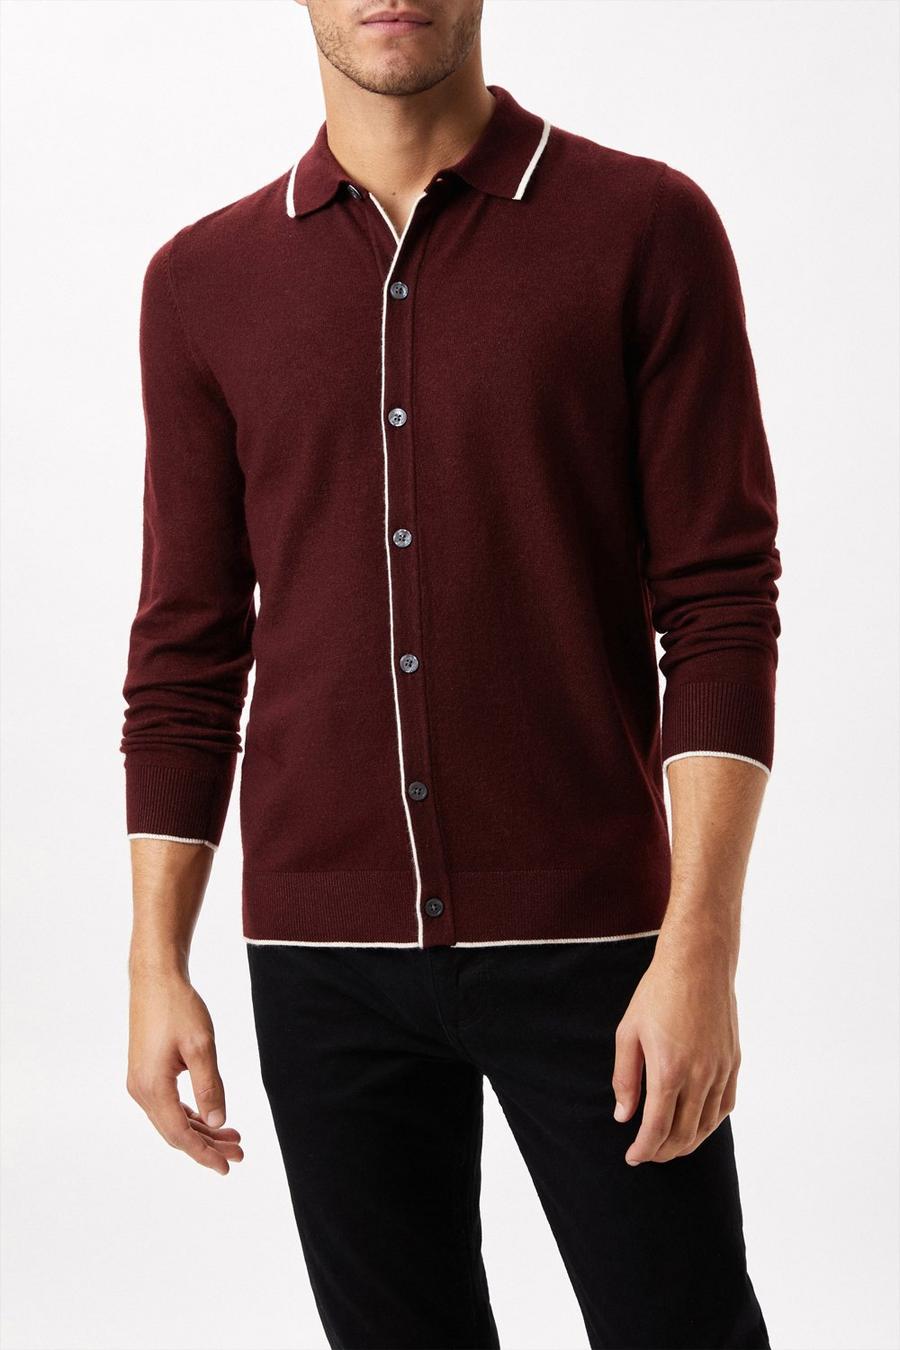 Super Soft Burgundy Tipped Placket Knitted Shirt